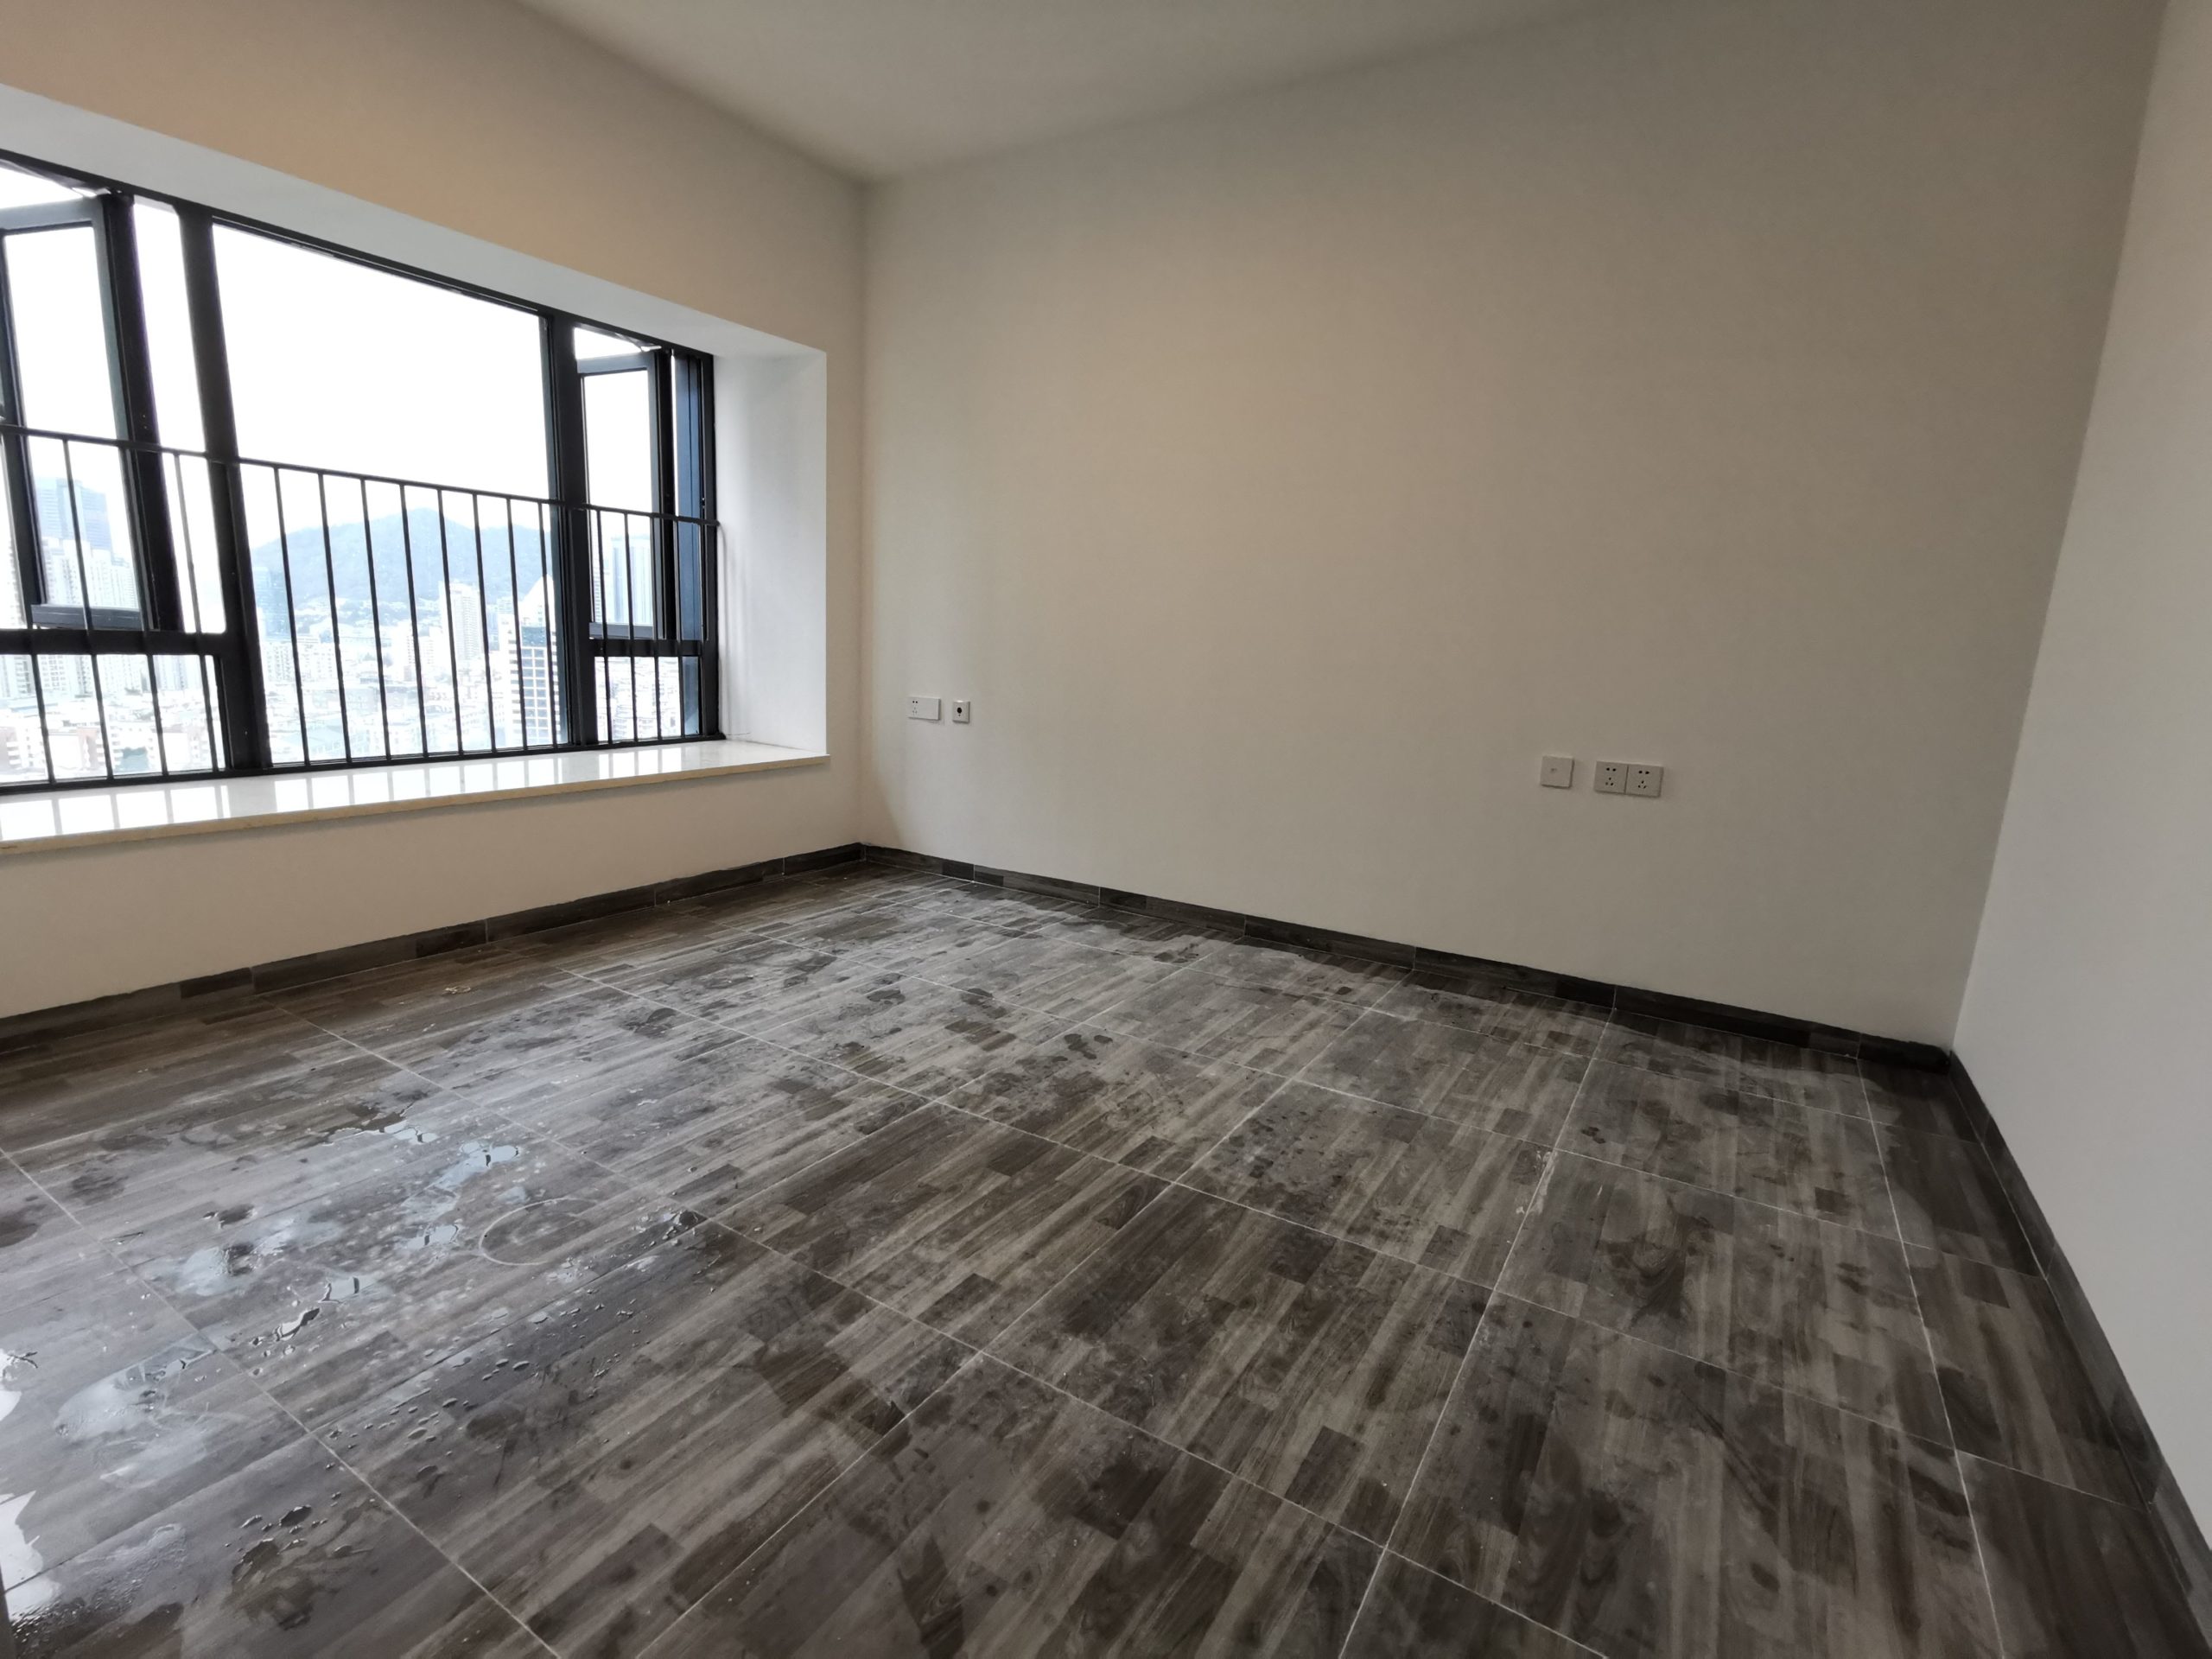 Featured image for “Brand new apt with 3bedrooms in high floor , nearby Dongjiaotou metro station”